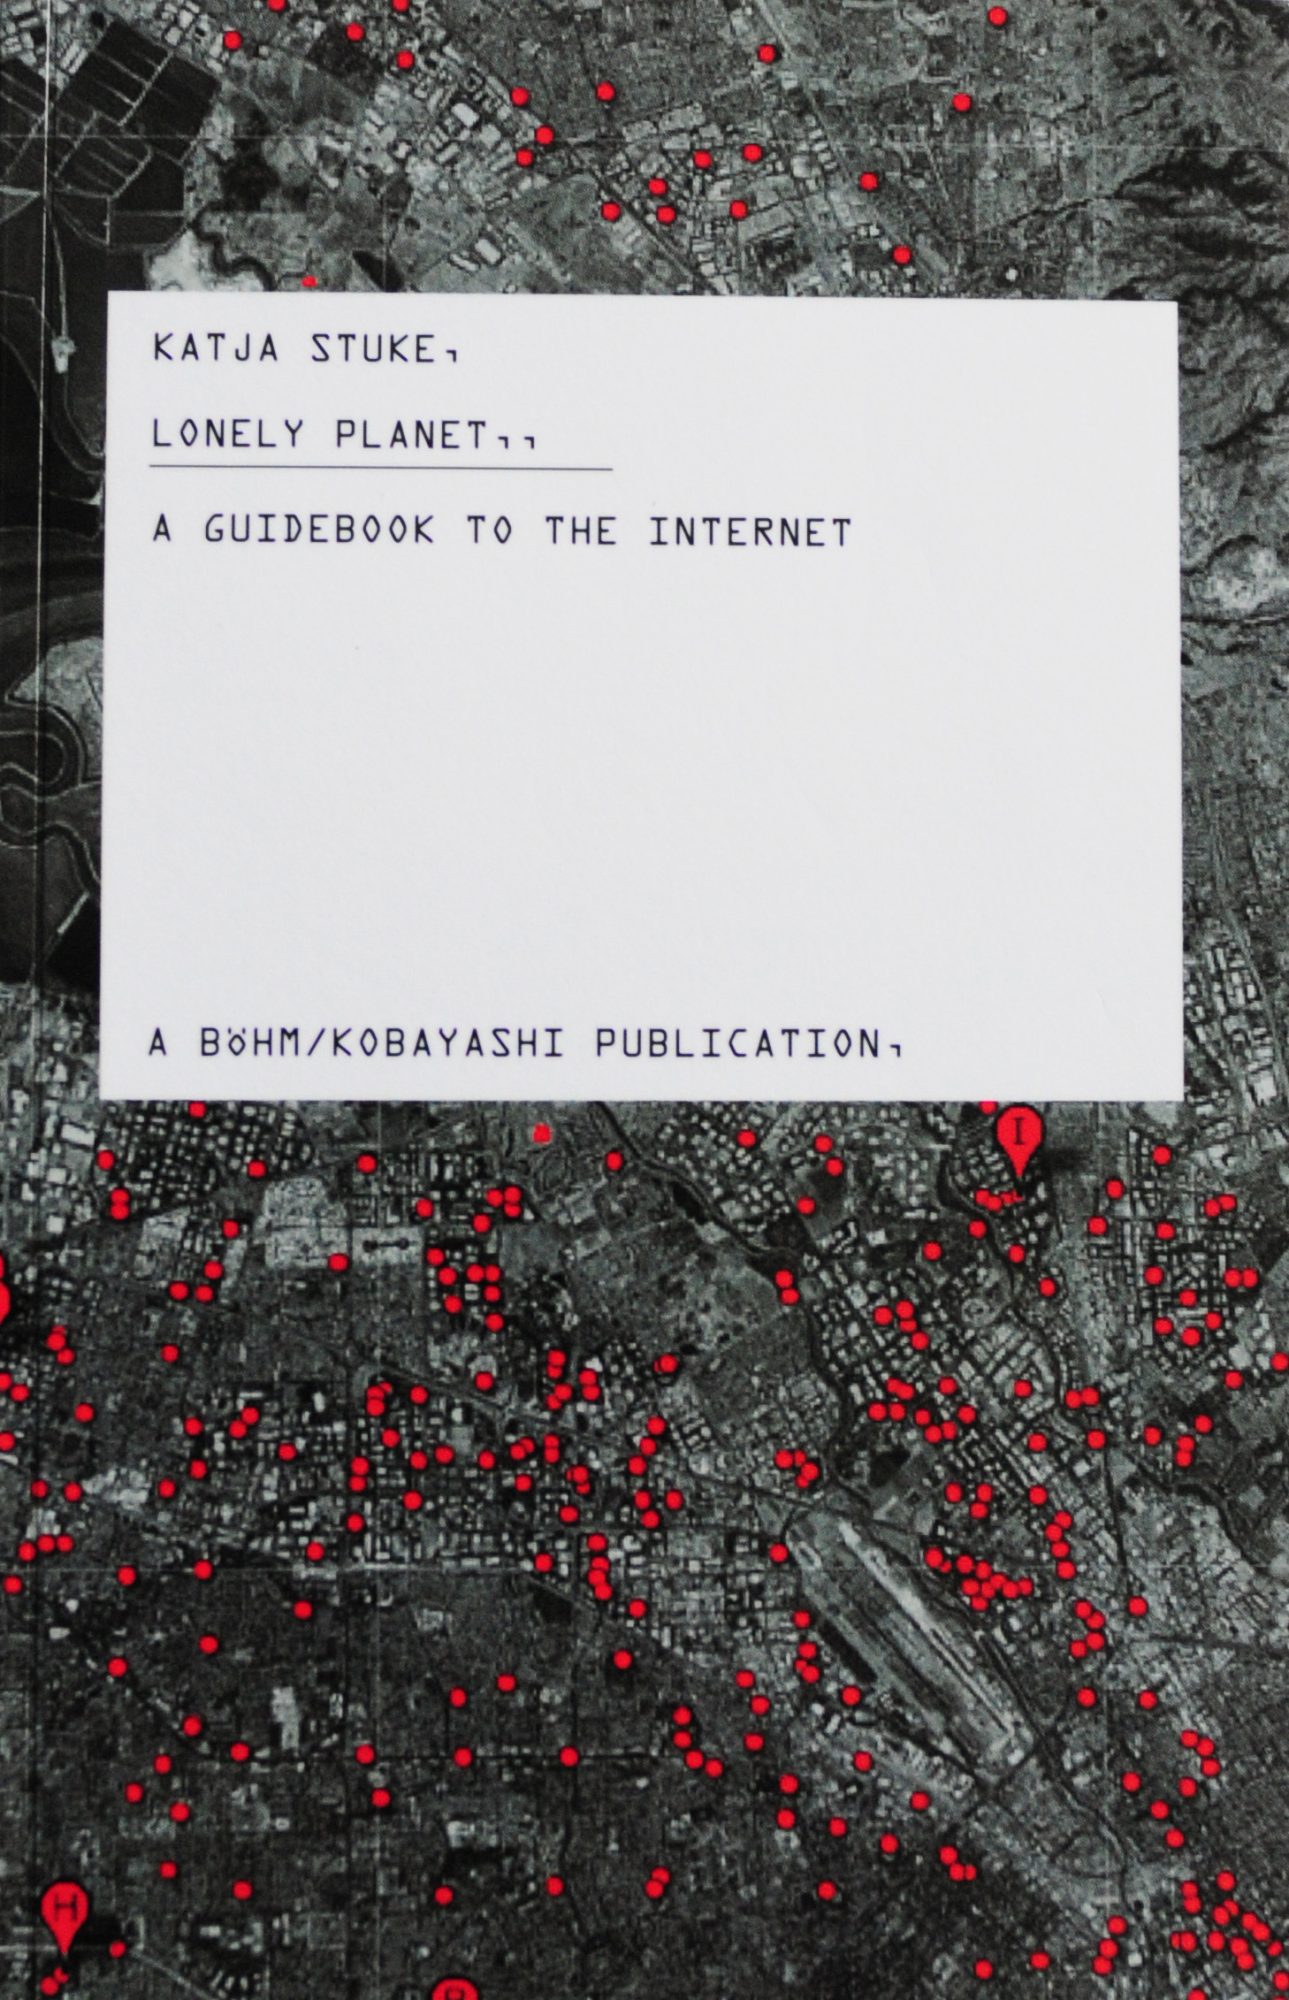 Lonely Planet- A Guidebook to the Internet, Katja Stuke